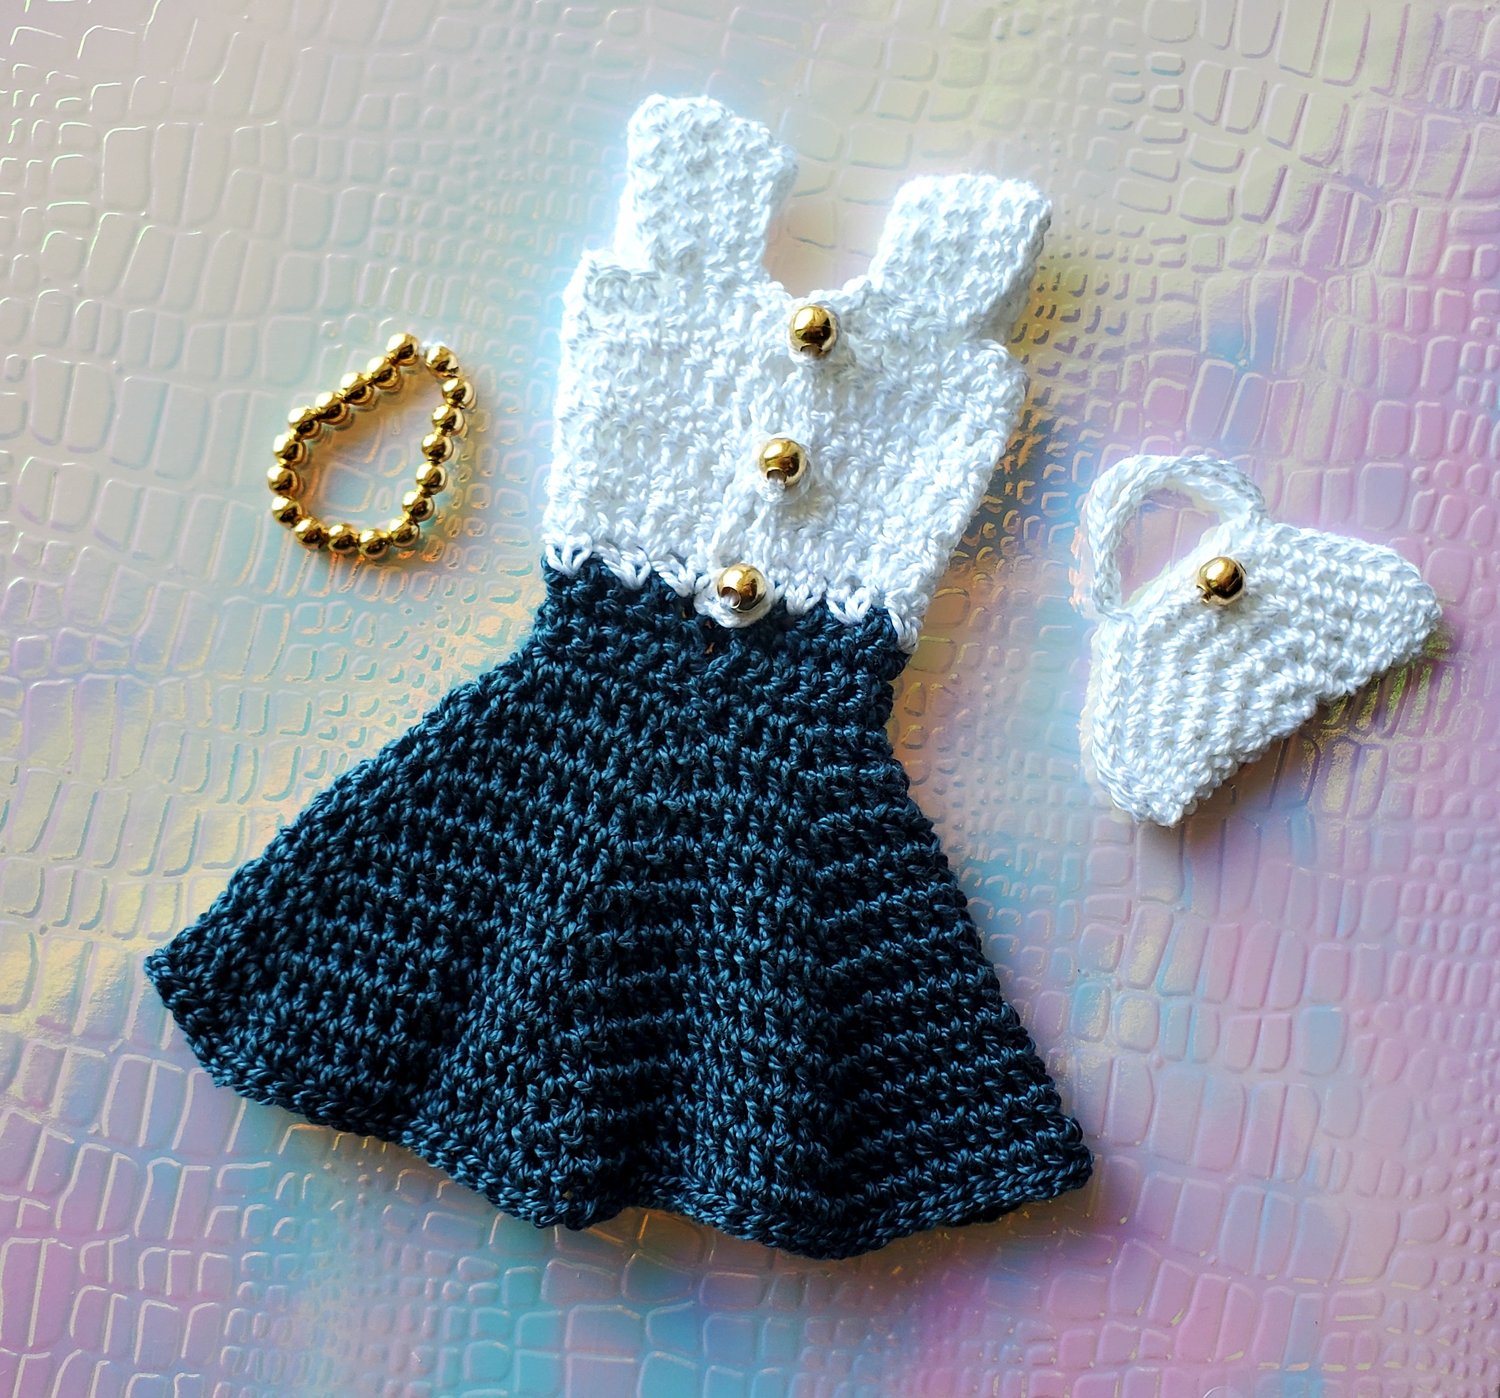 Barbie Shell-Stitched Skirt and Crop Top (Free Crochet Pattern) - FeltMagnet